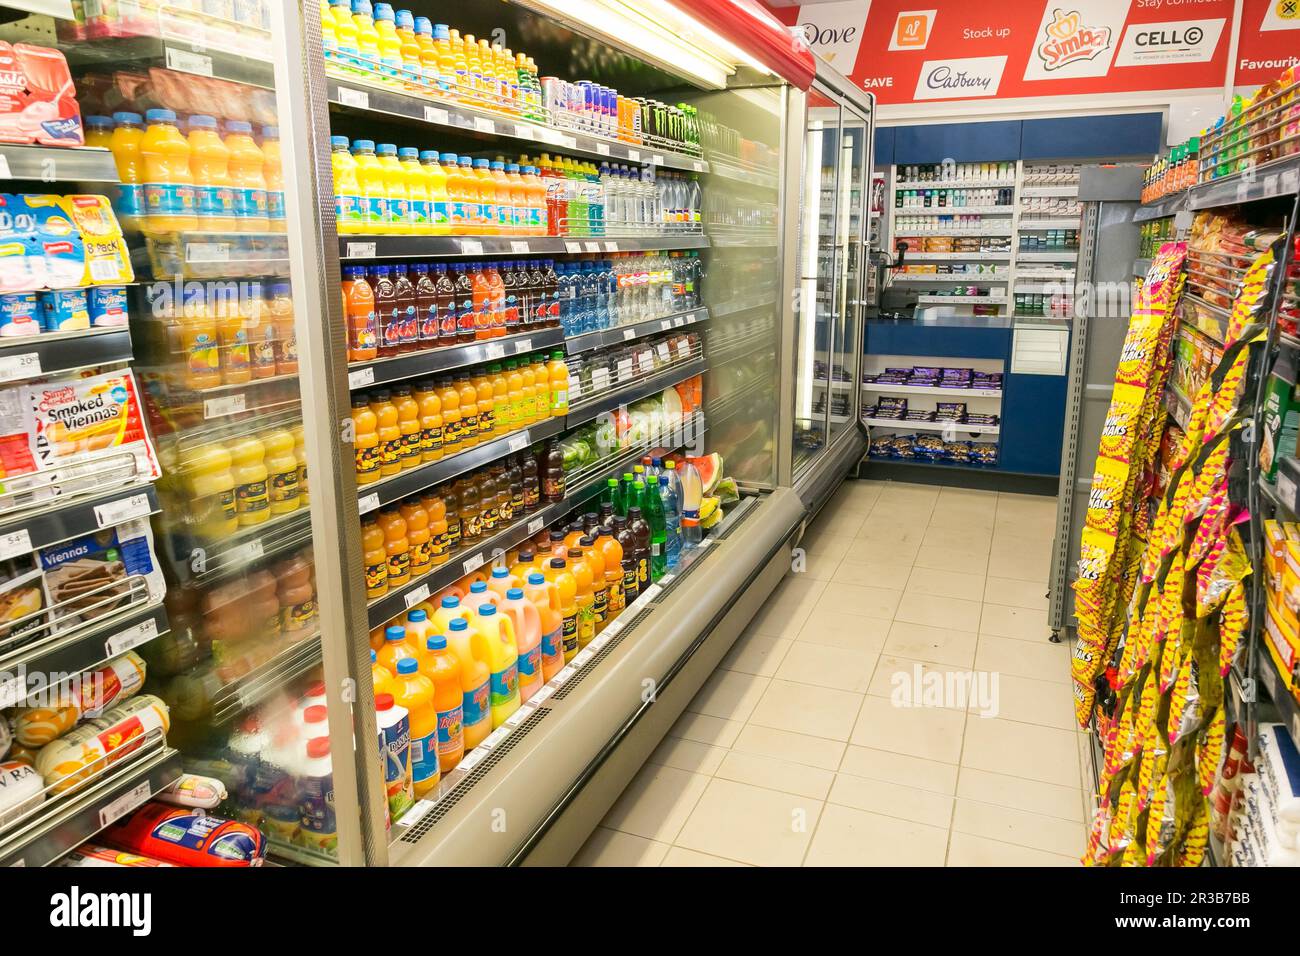 Fully stocked shelves of food and household items at local Pick n Pay grocery store Stock Photo